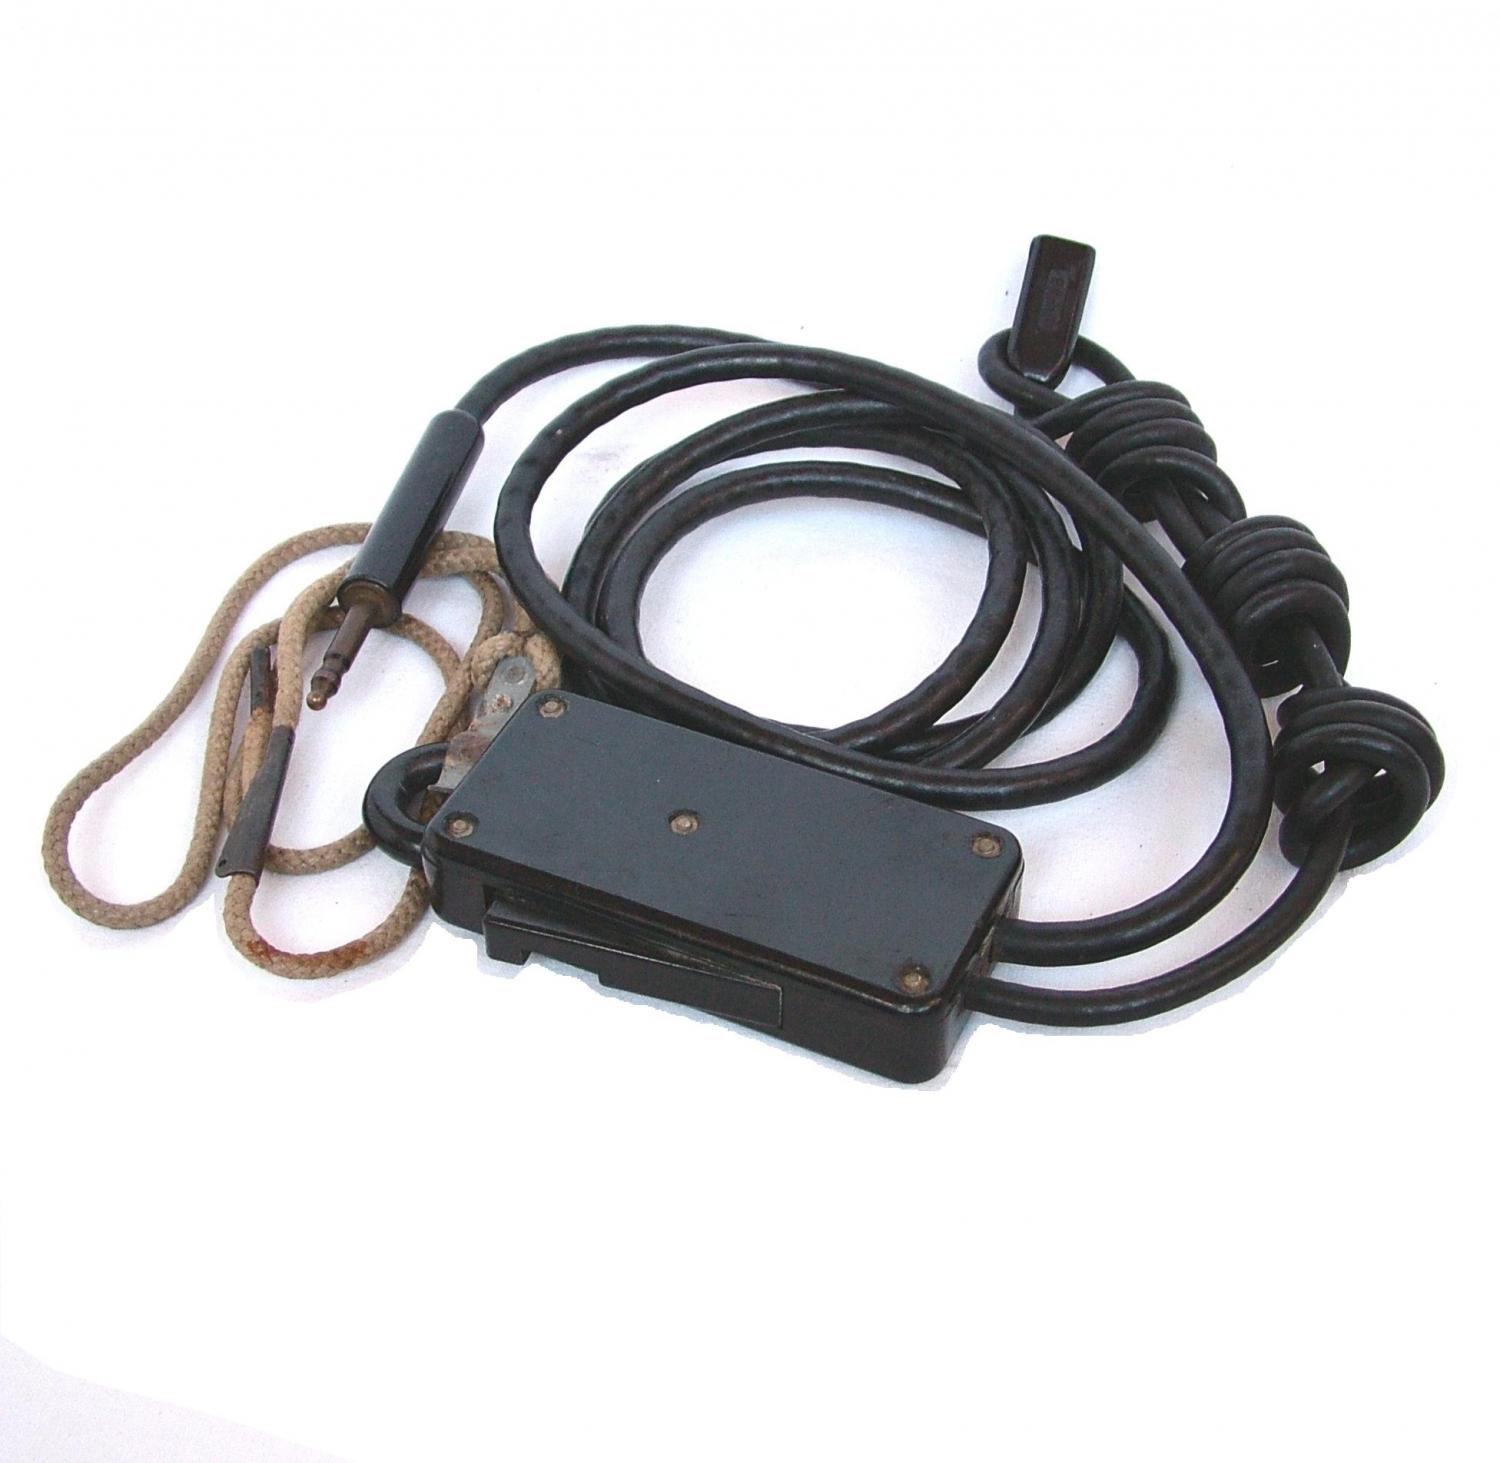 USAAF Throatmicrophone Extension Cord CD-318-